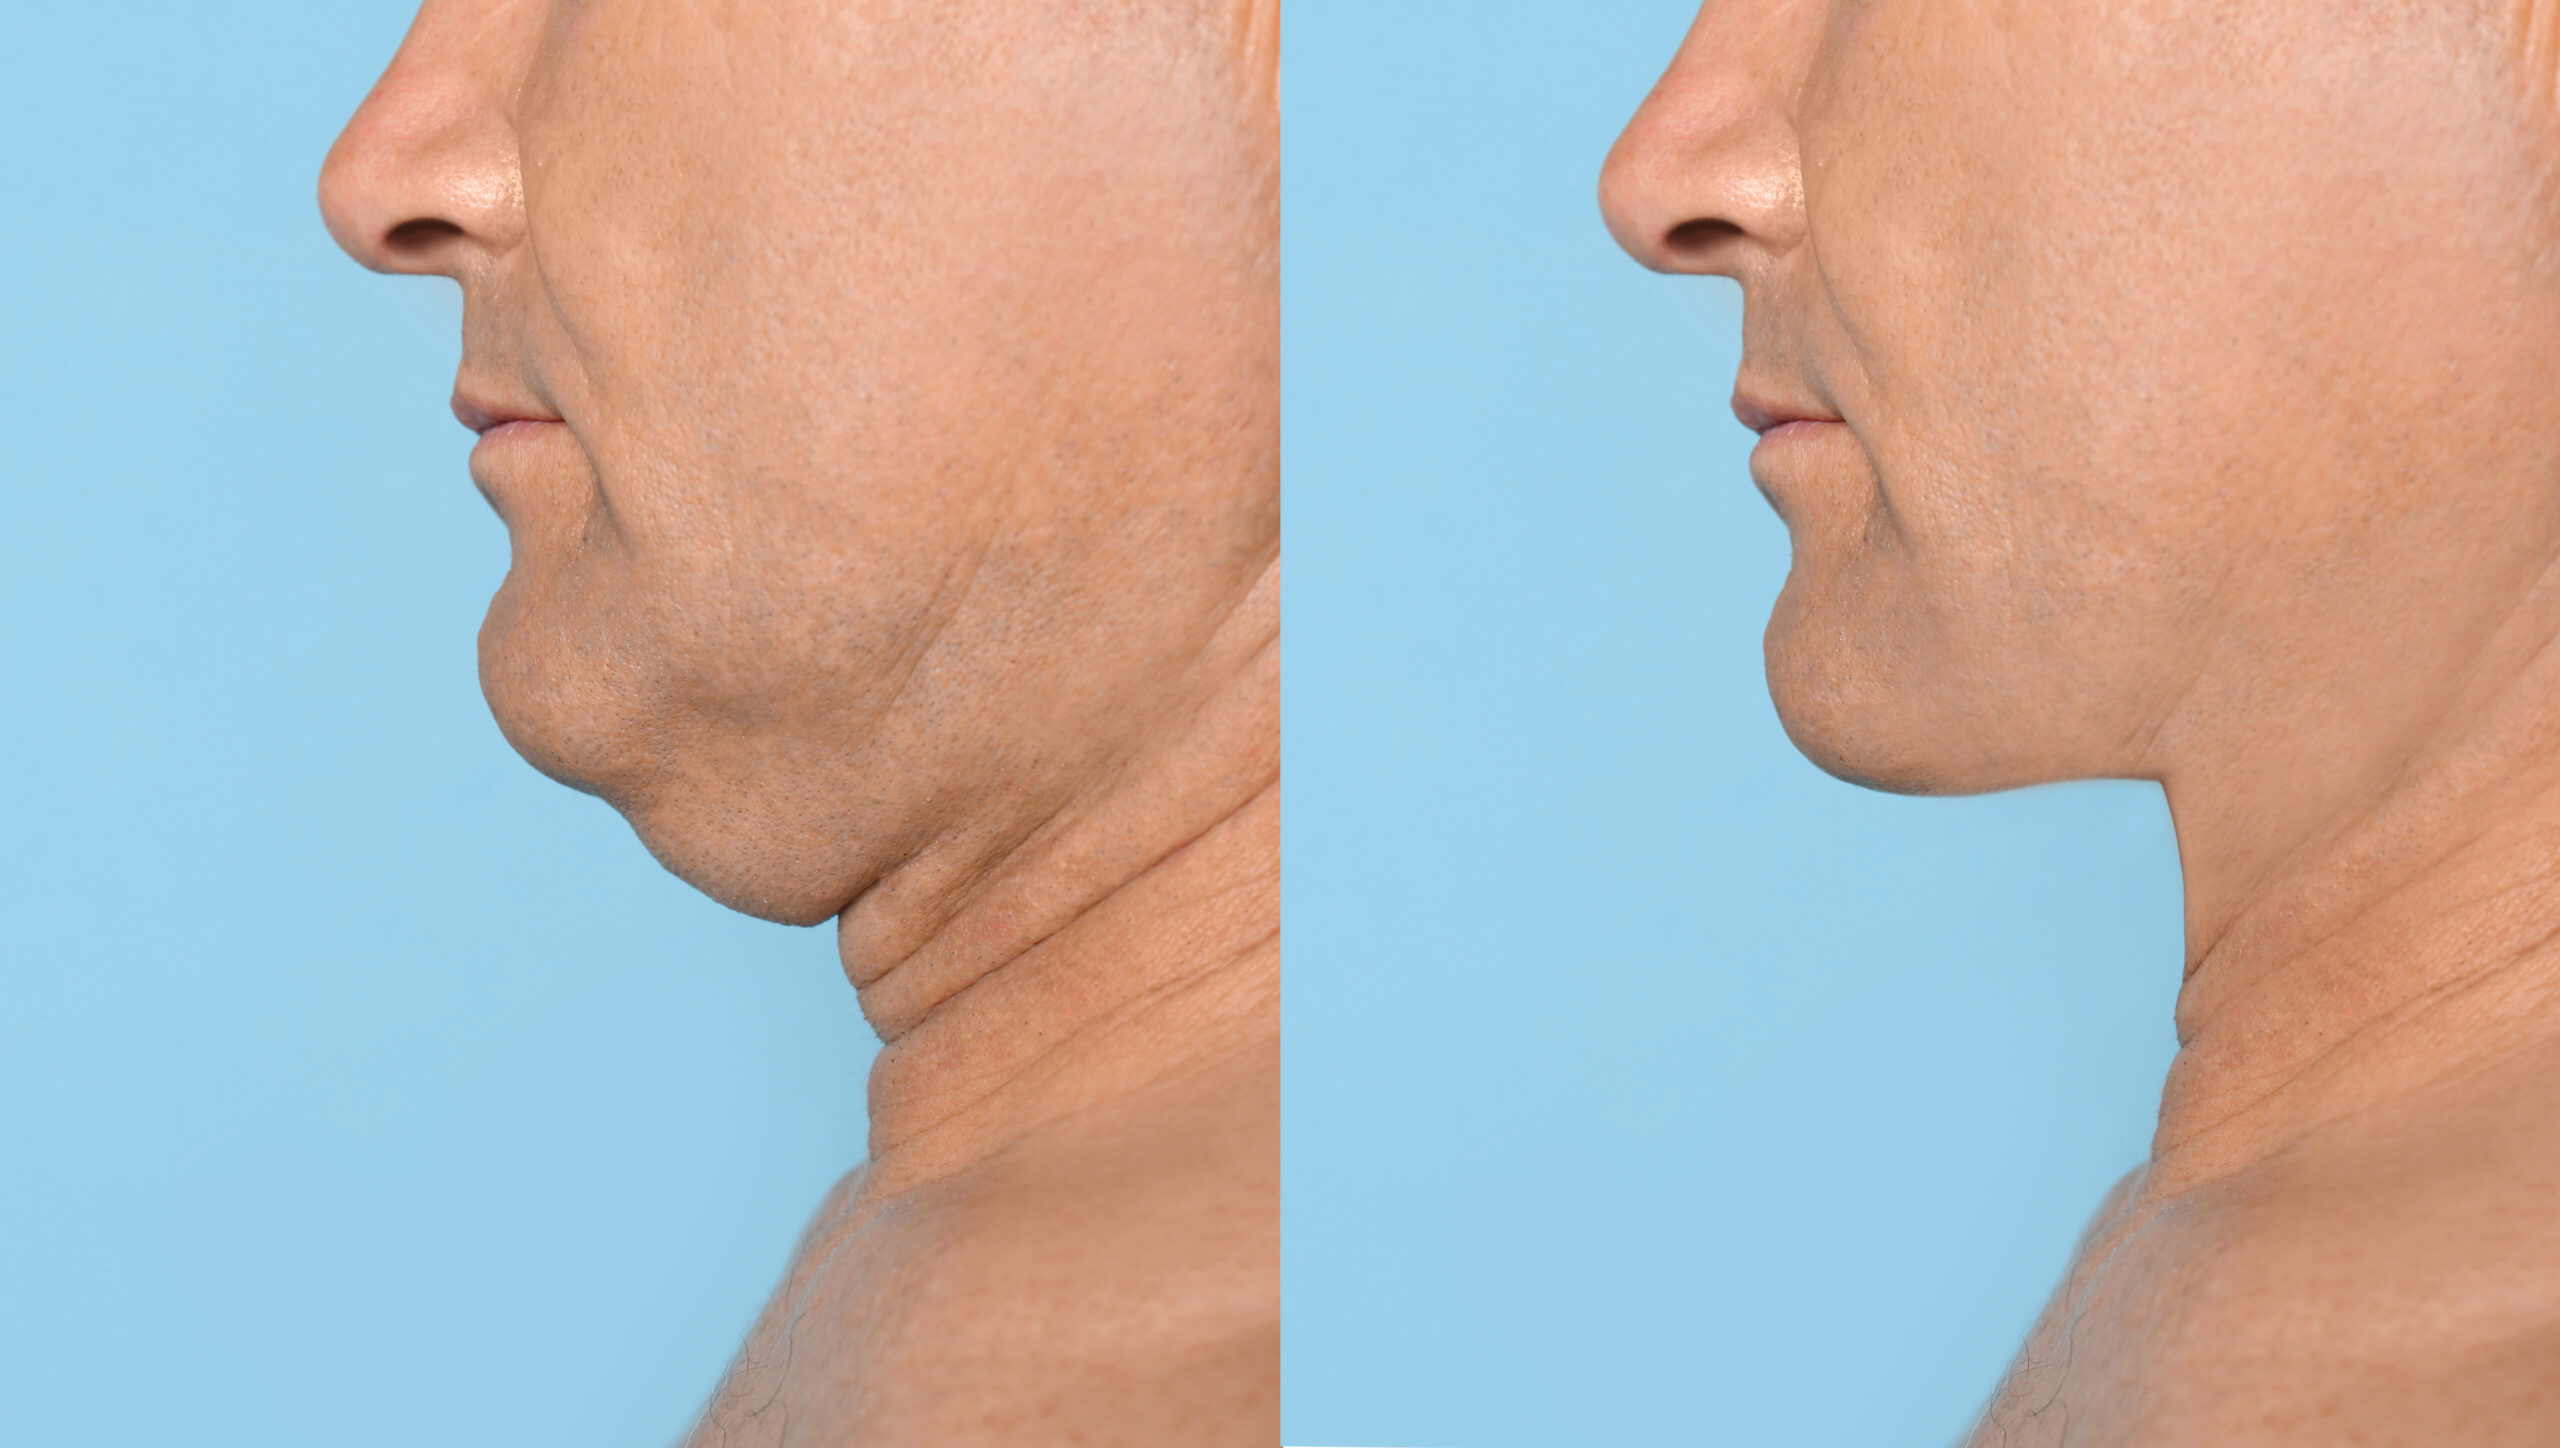 The before and after pictures of a man that received Kybella treatment for his double chin.